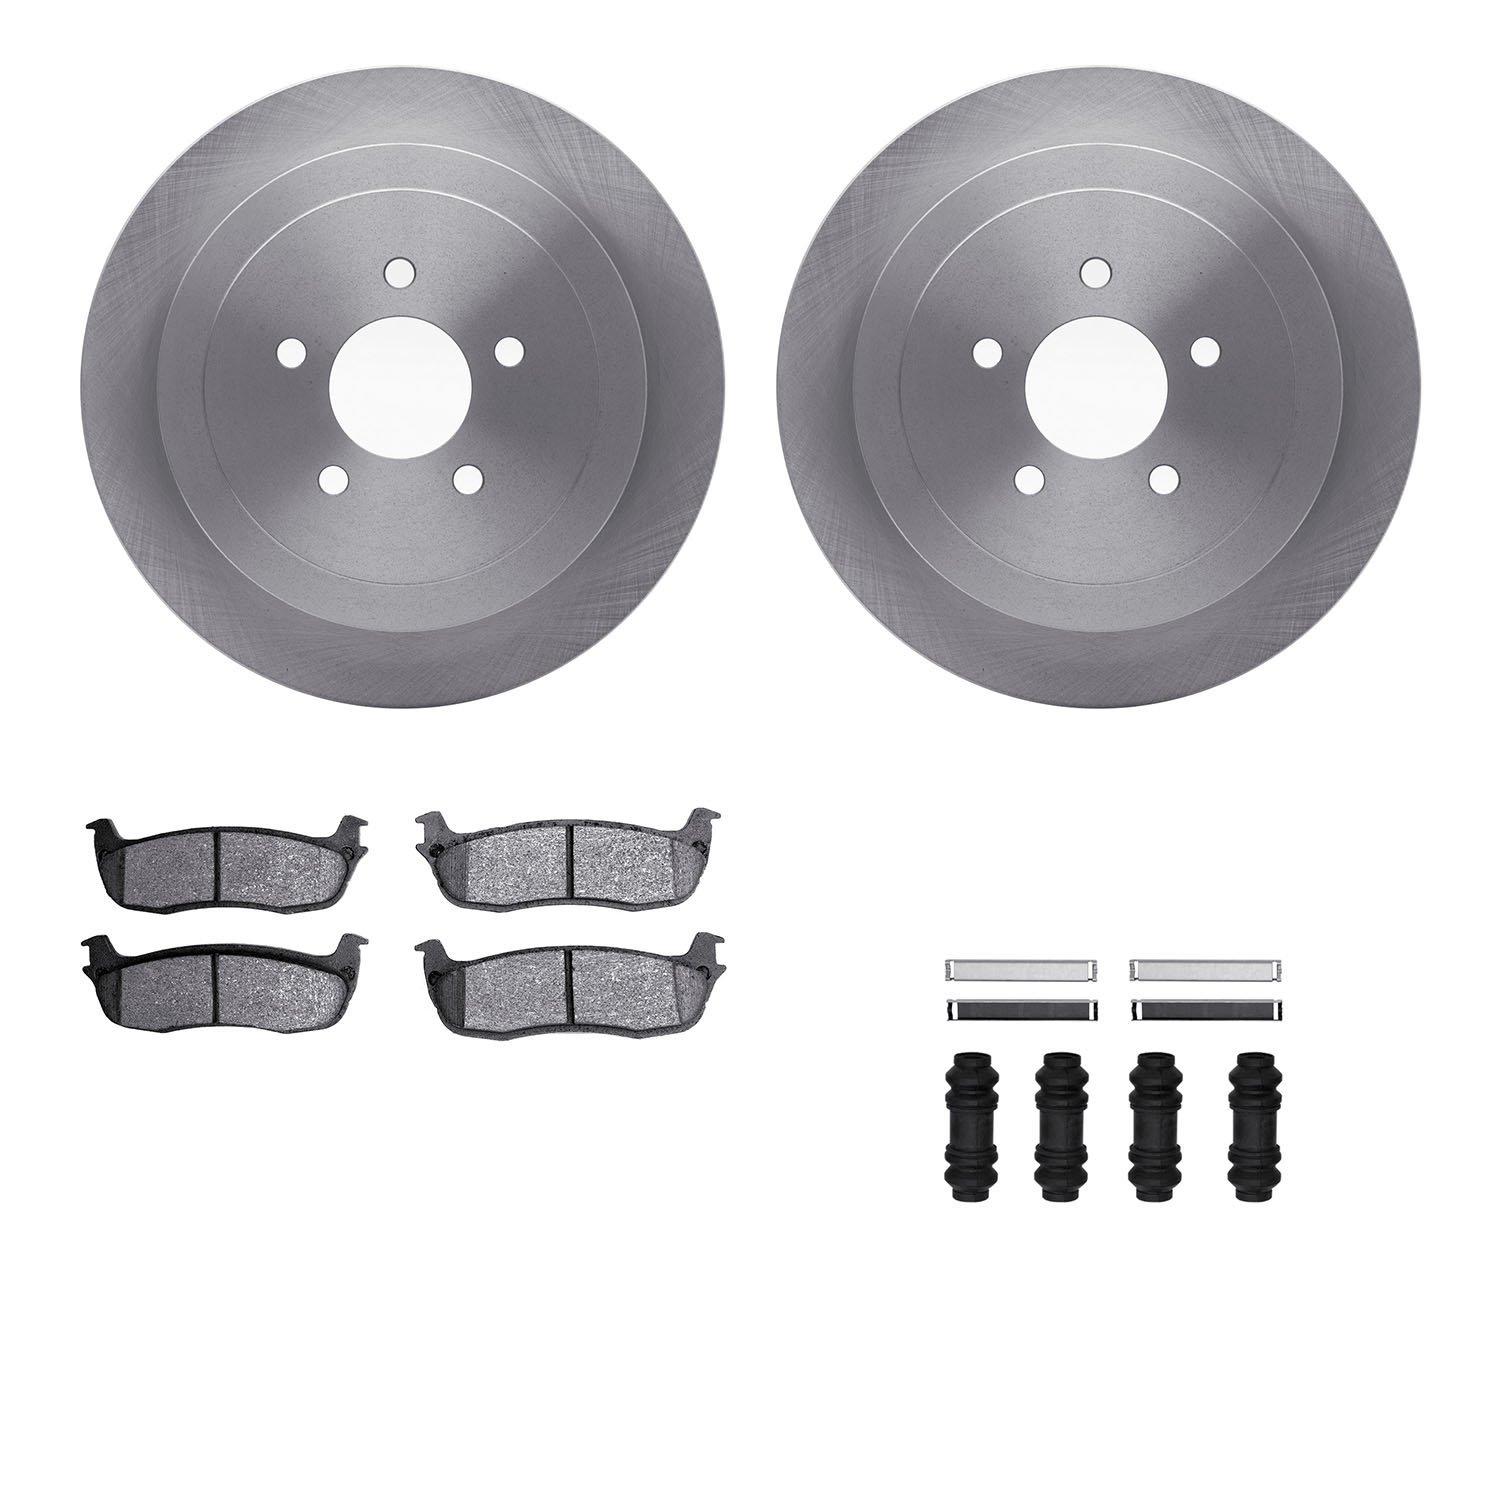 6412-55001 Brake Rotors with Ultimate-Duty Brake Pads Kit & Hardware, 2003-2011 Ford/Lincoln/Mercury/Mazda, Position: Rear